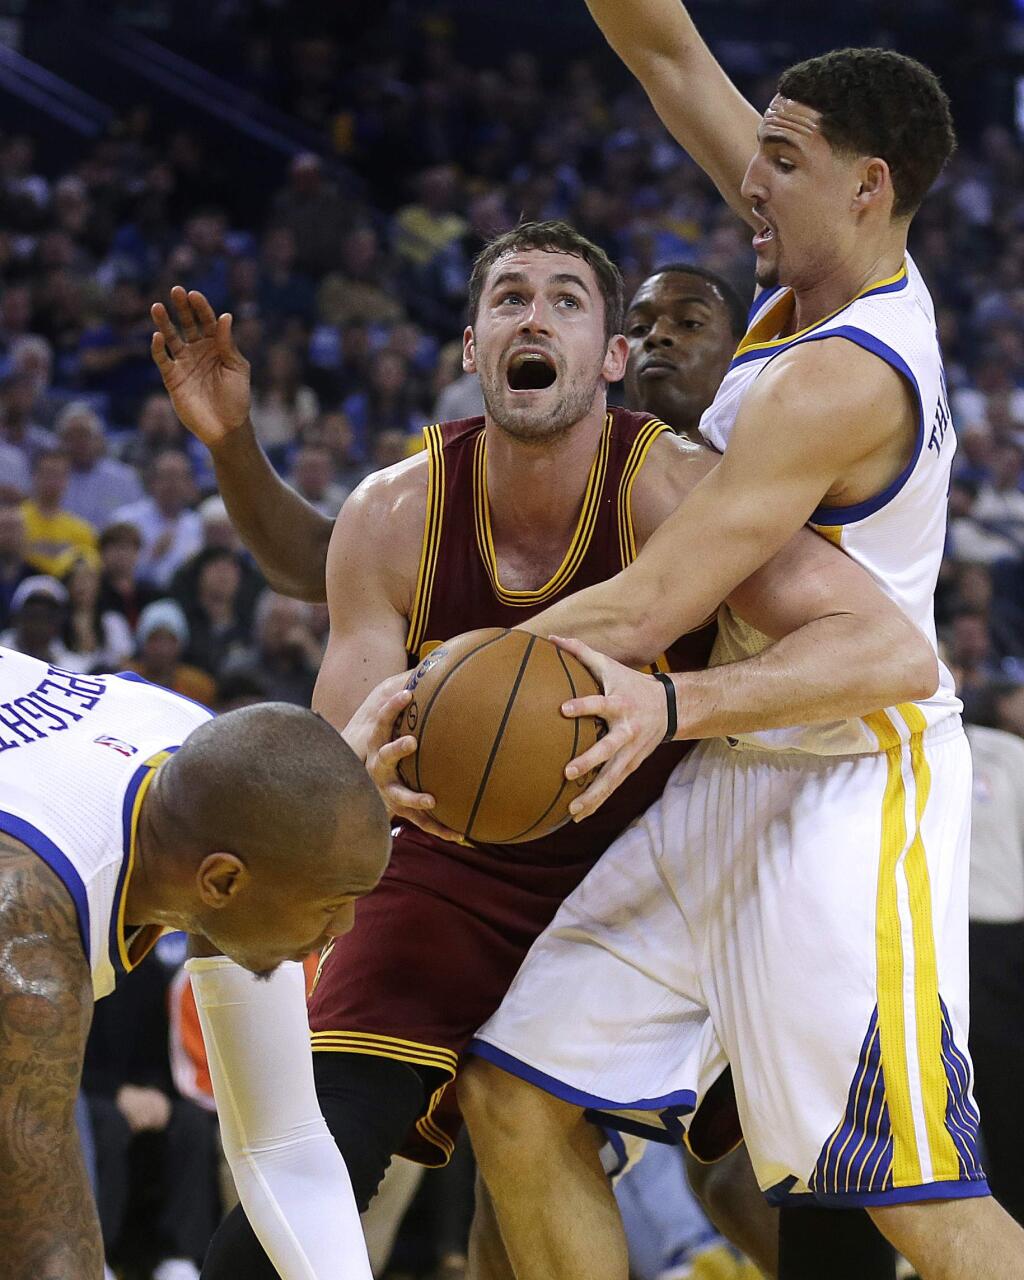 Cleveland Cavaliers' Kevin Love looks to pass away from Golden State Warriors' Klay Thompson, right, and Marreese Speights, left, during the first half of a game Friday, Jan. 9, 2015, in Oakland. (AP Photo/Ben Margot)